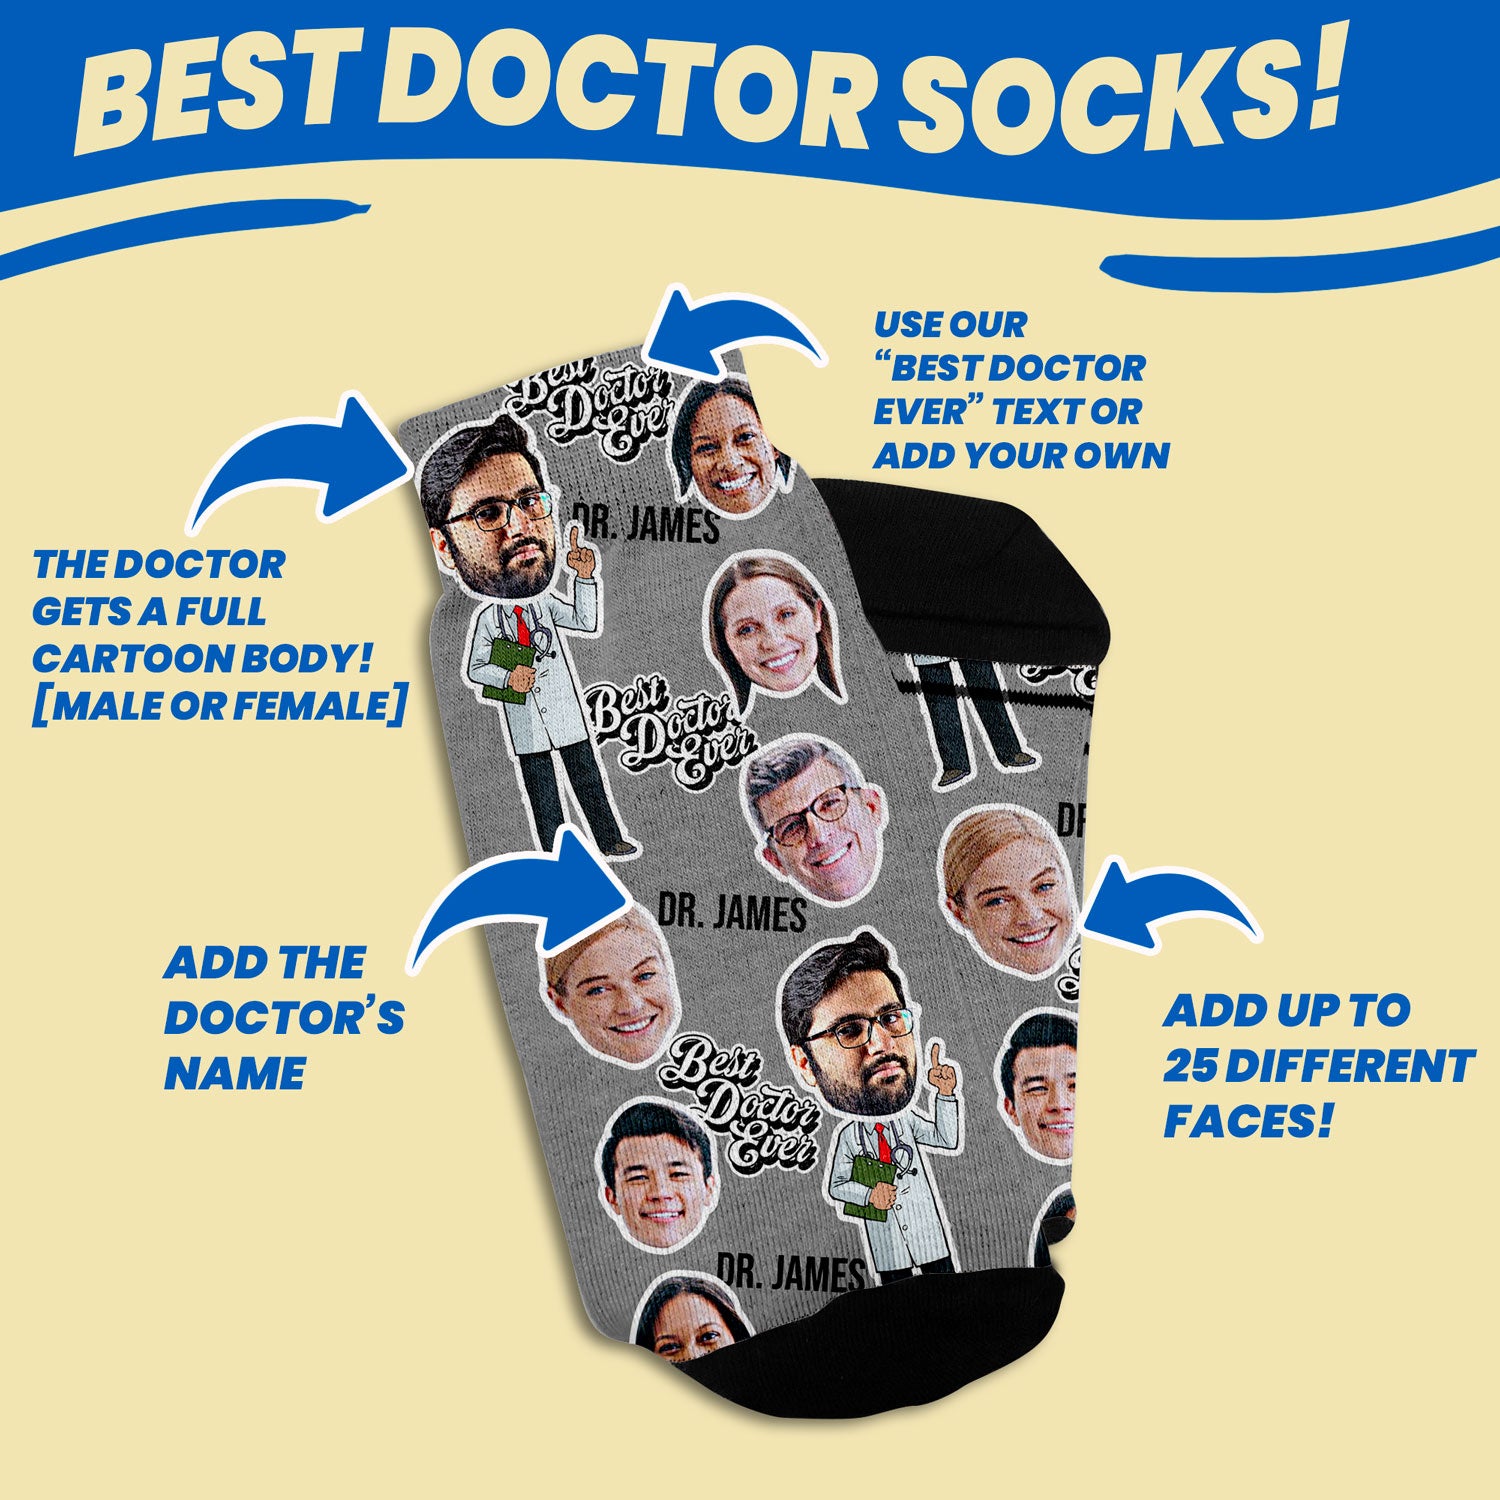 personalized socks with doctor&#39;s face and medical team design options such as adding doctor&#39;s name, adding 25 different faces and the &quot;best doctor ever&quot; text to the personalized sock